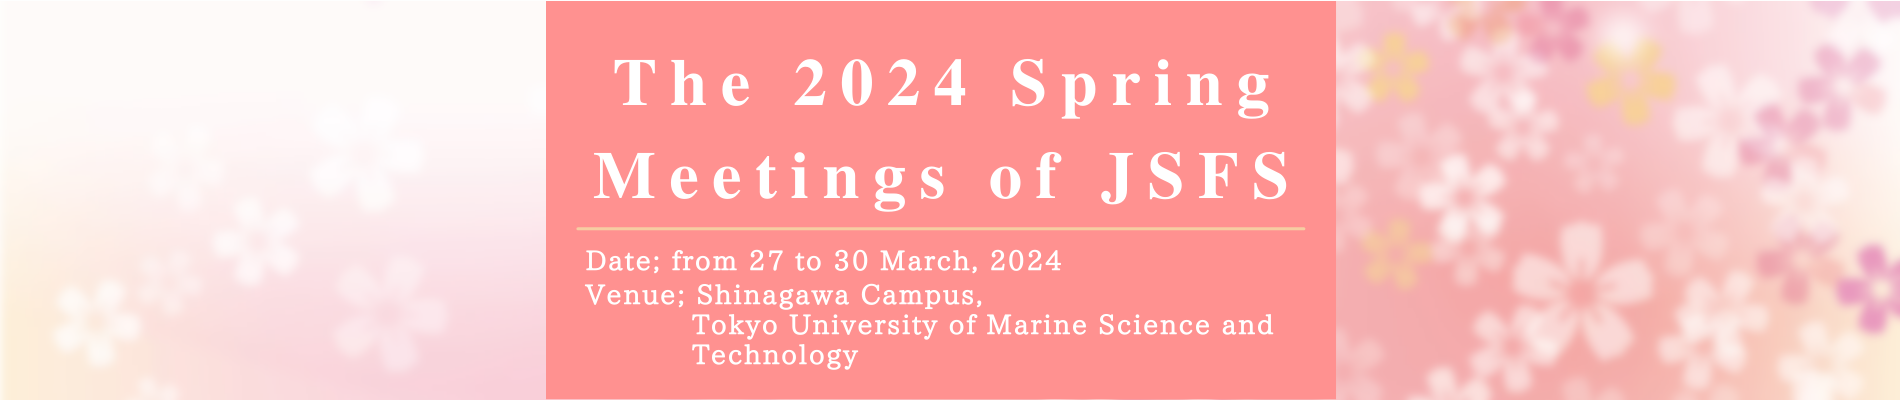 The 2024 Spring Meetings of JSFS